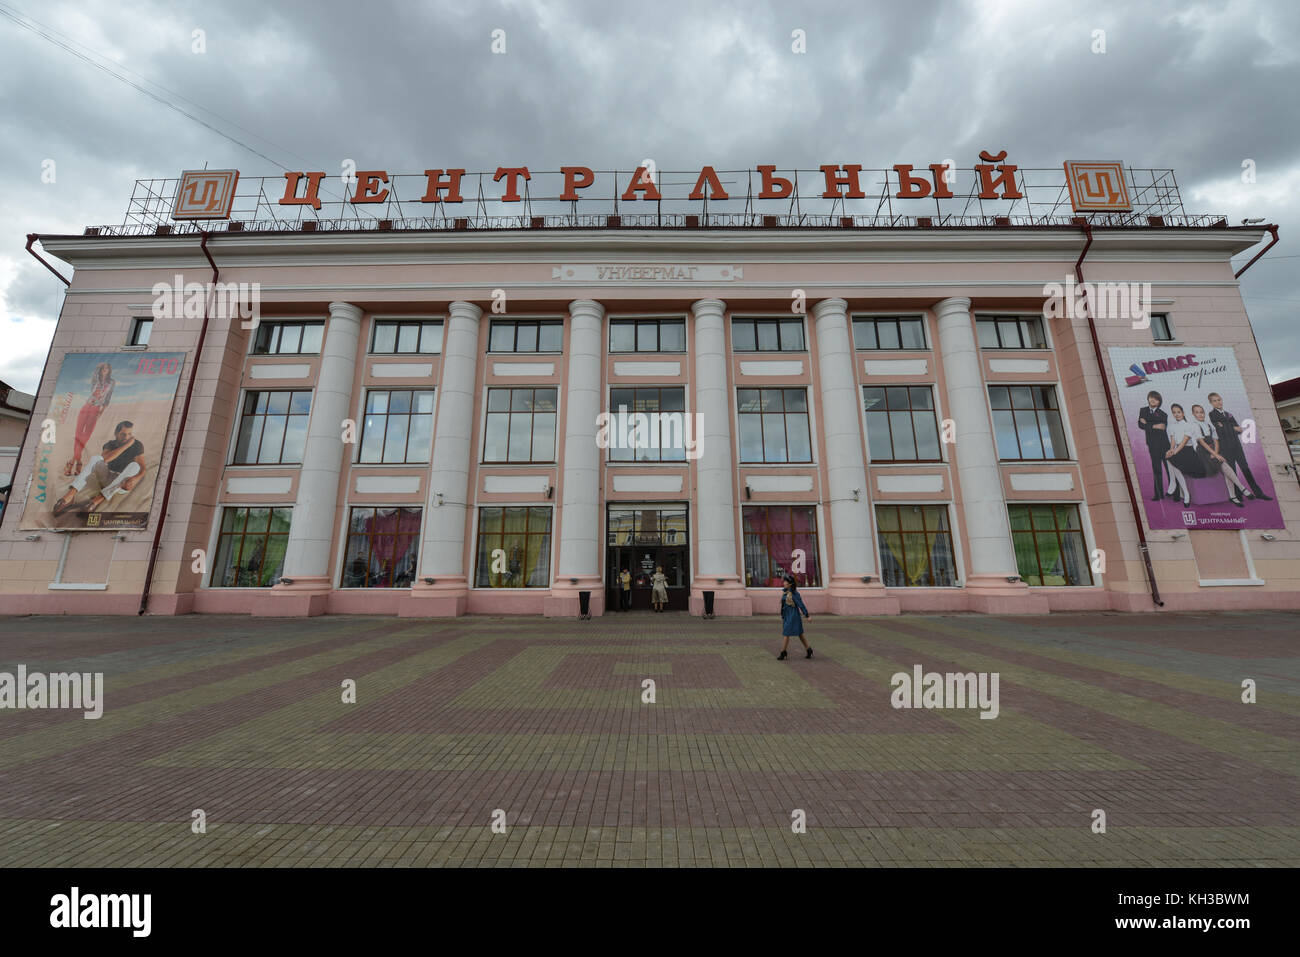 ULAN-UDE, BURYATIA, RUSSIA - SEPTEMBER 9, 2013. Typical Buryat walking across a Soviet-style mall - Centralniy Univermag translated as Central Univers Stock Photo